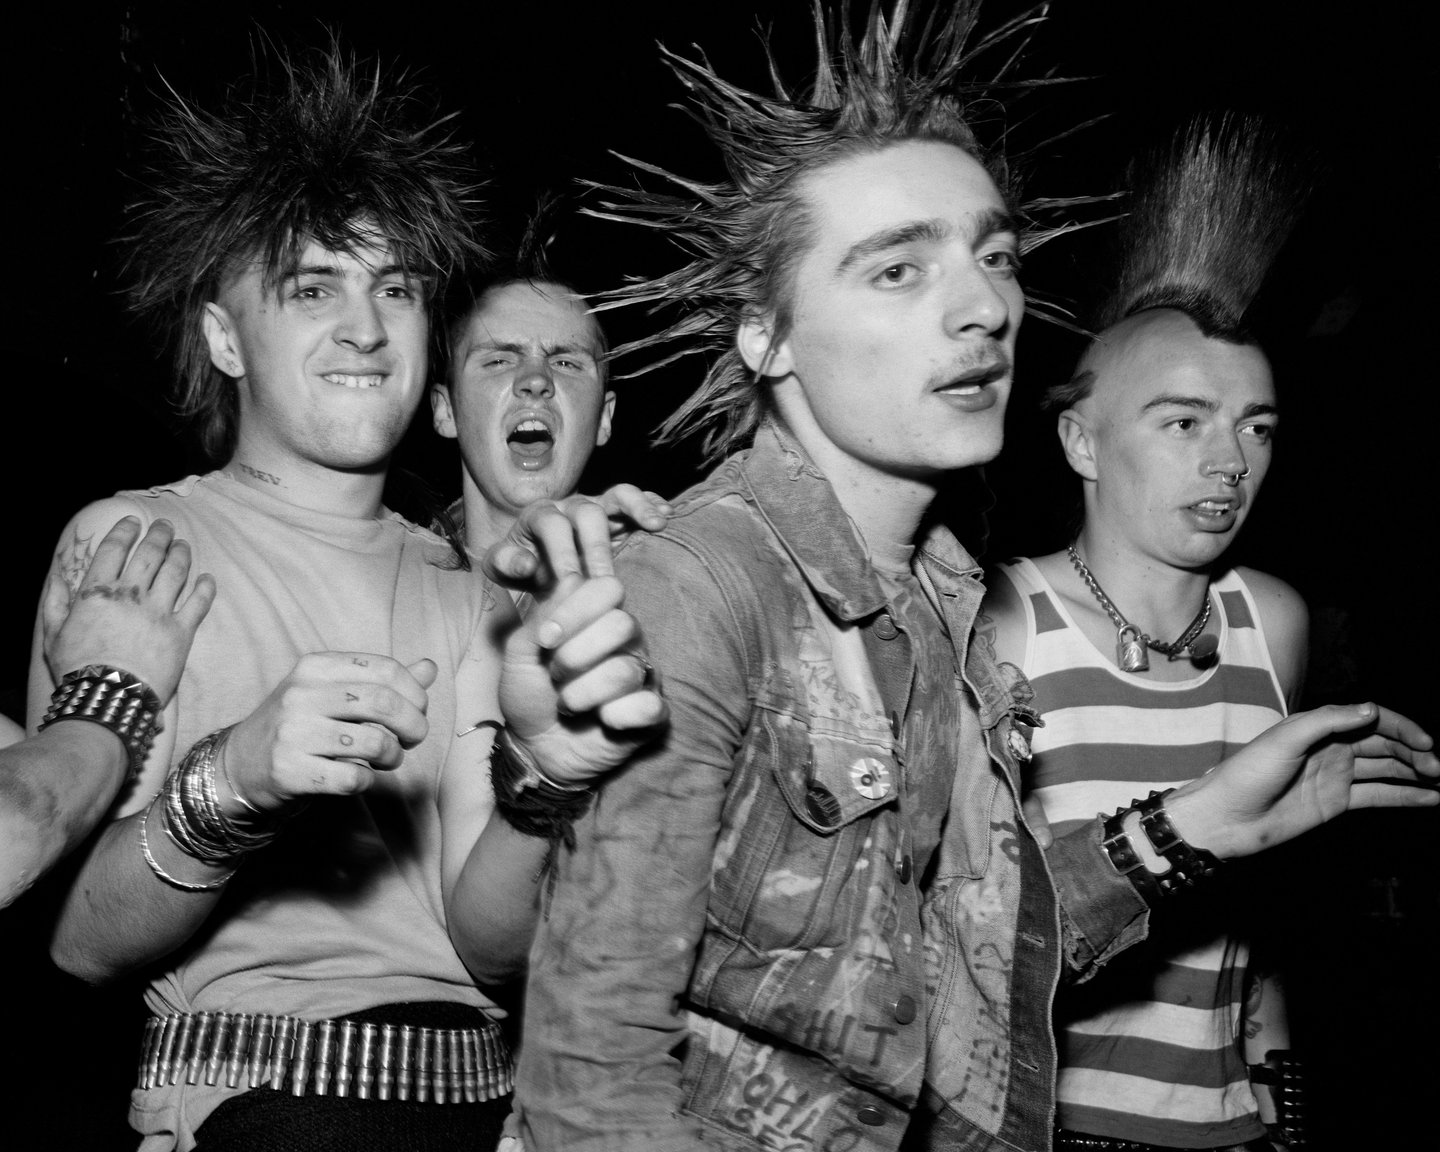 An exclusive chat with photographer Chris Killip and his son – who uncovered a lost archive of an 80s punk venue